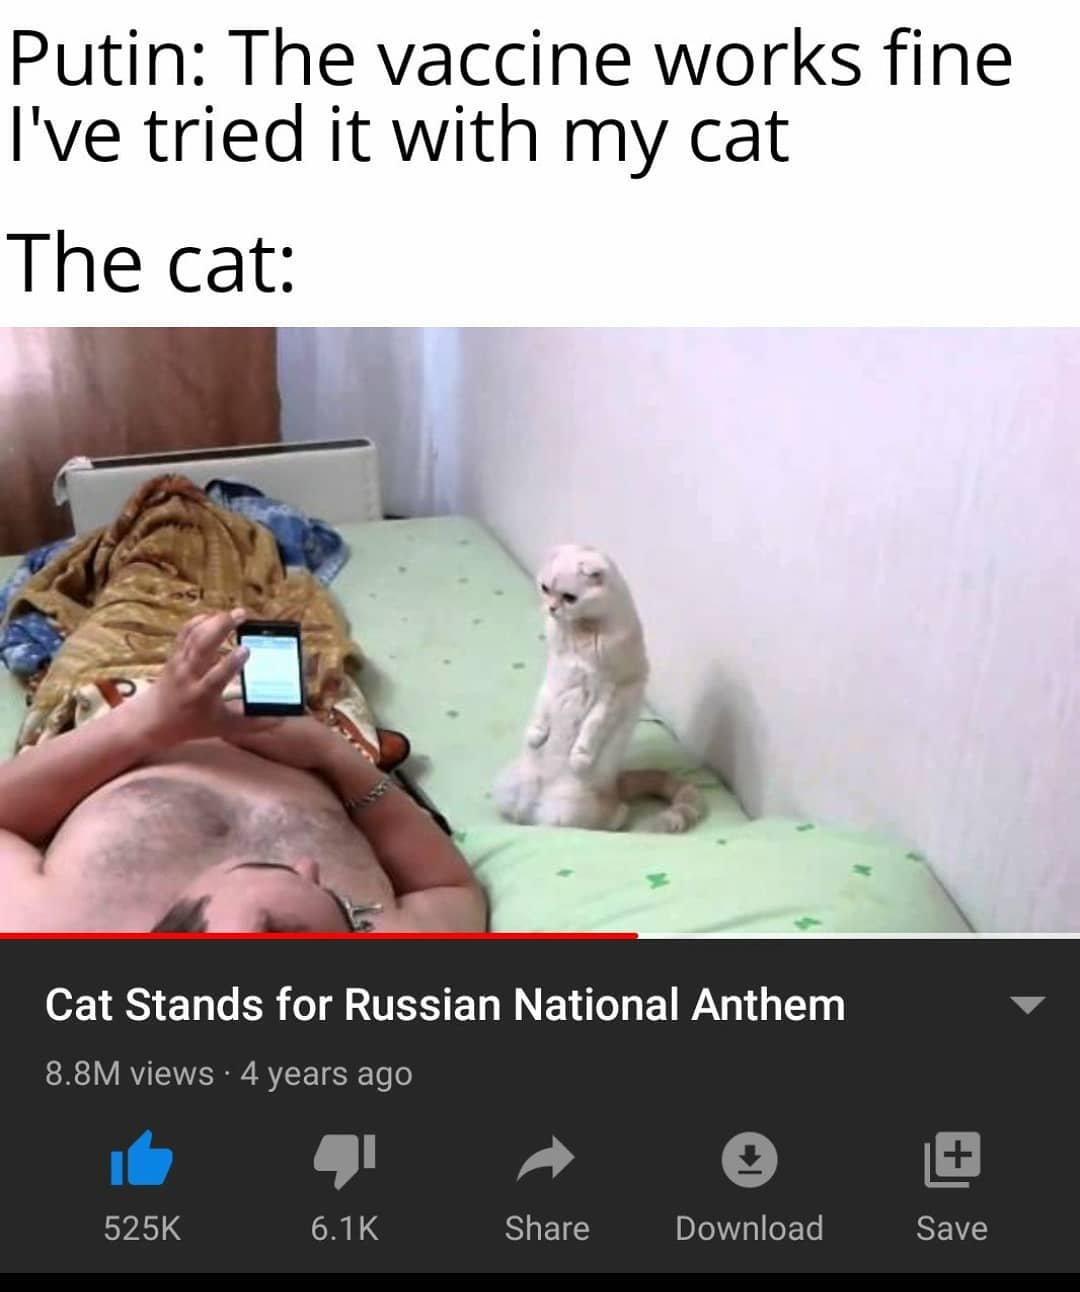 dank memes - Russia - Putin The vaccine works fine I've tried it with my cat The cat Cat Stands for Russian National Anthem 8.8M views 4 years ago Download Save